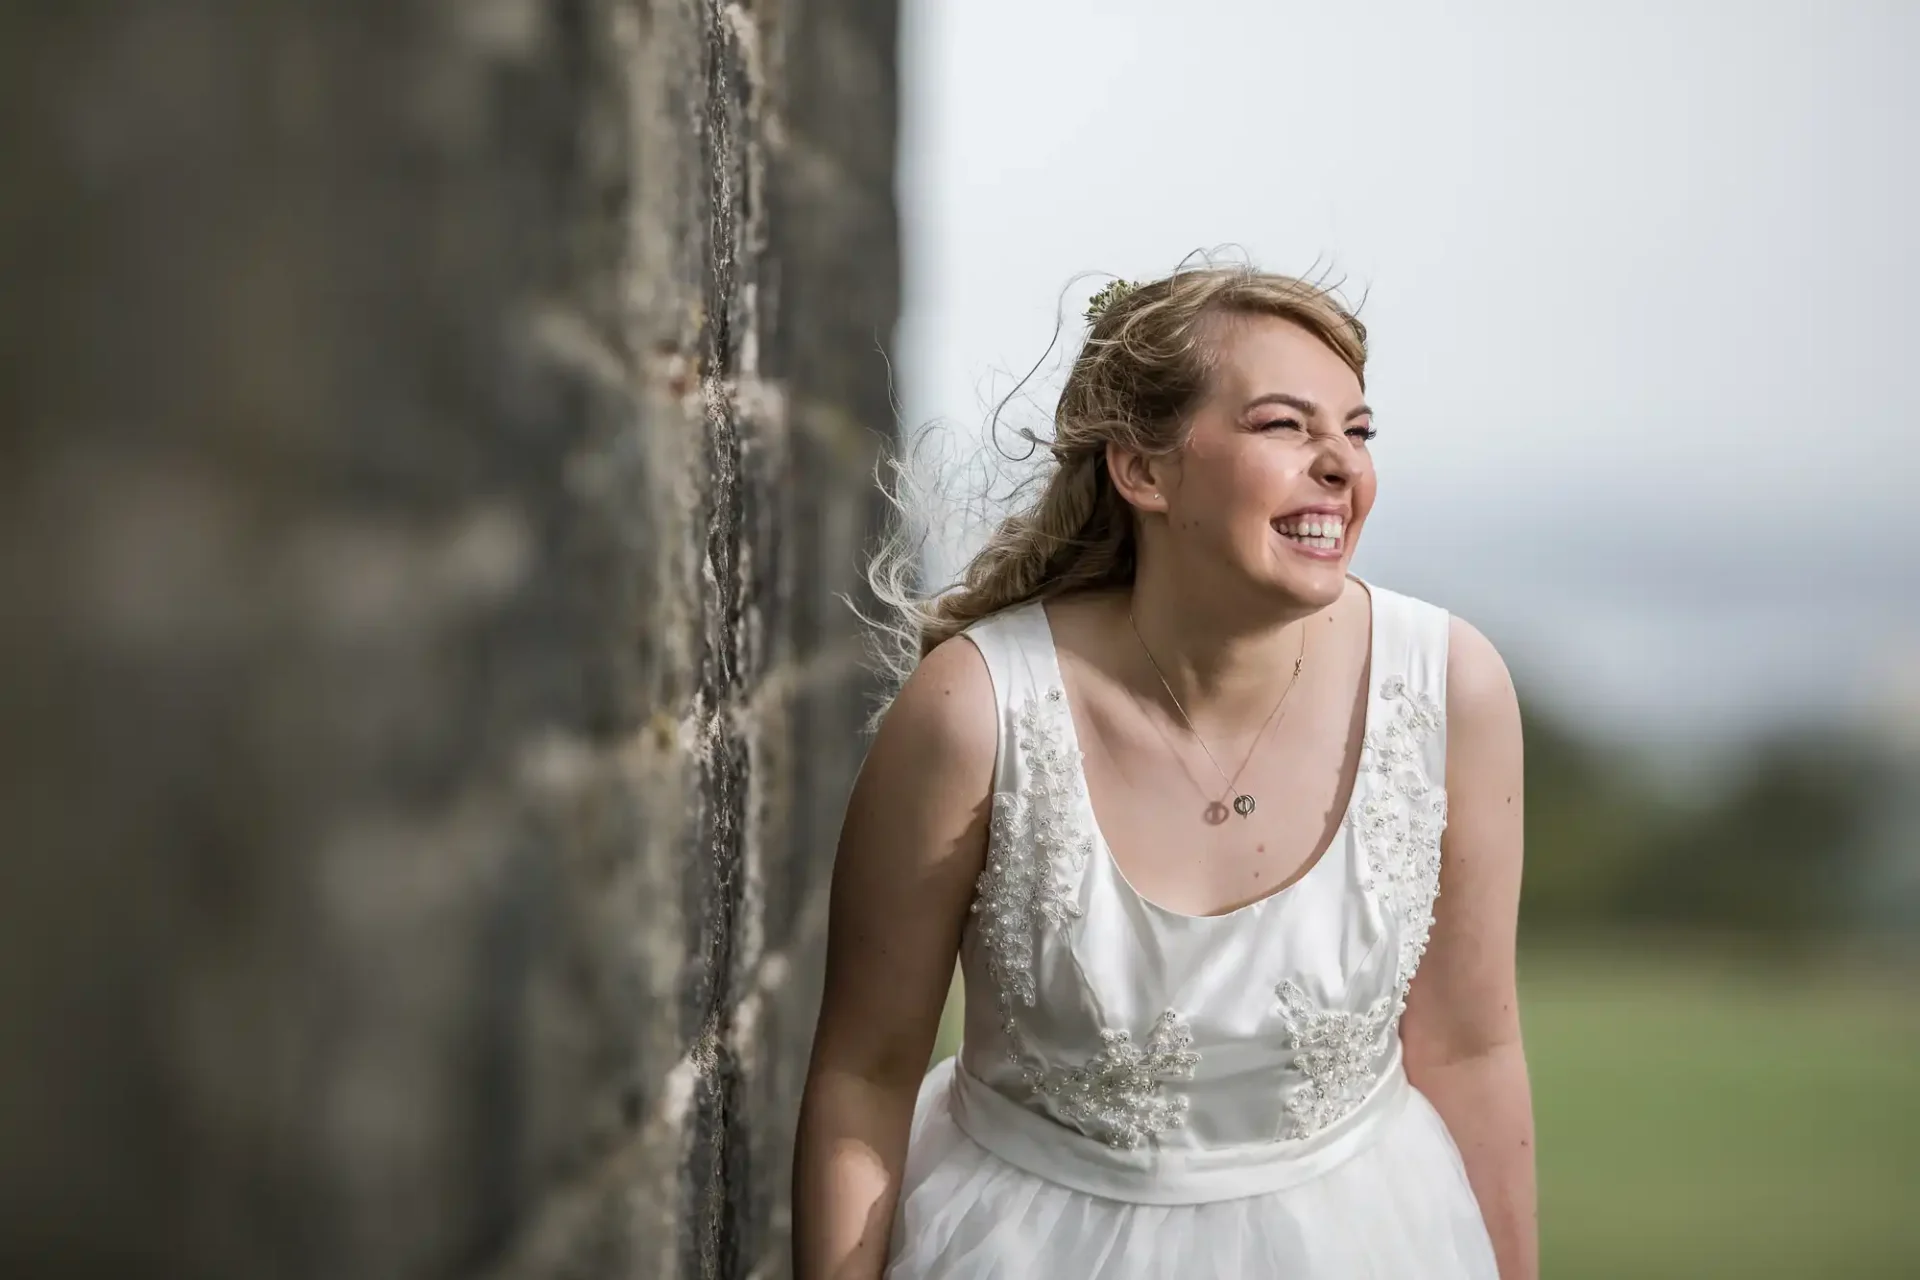 A joyful bride in a white dress with embellished details, smiling as she leans on a stone wall in a grassy outdoor setting.